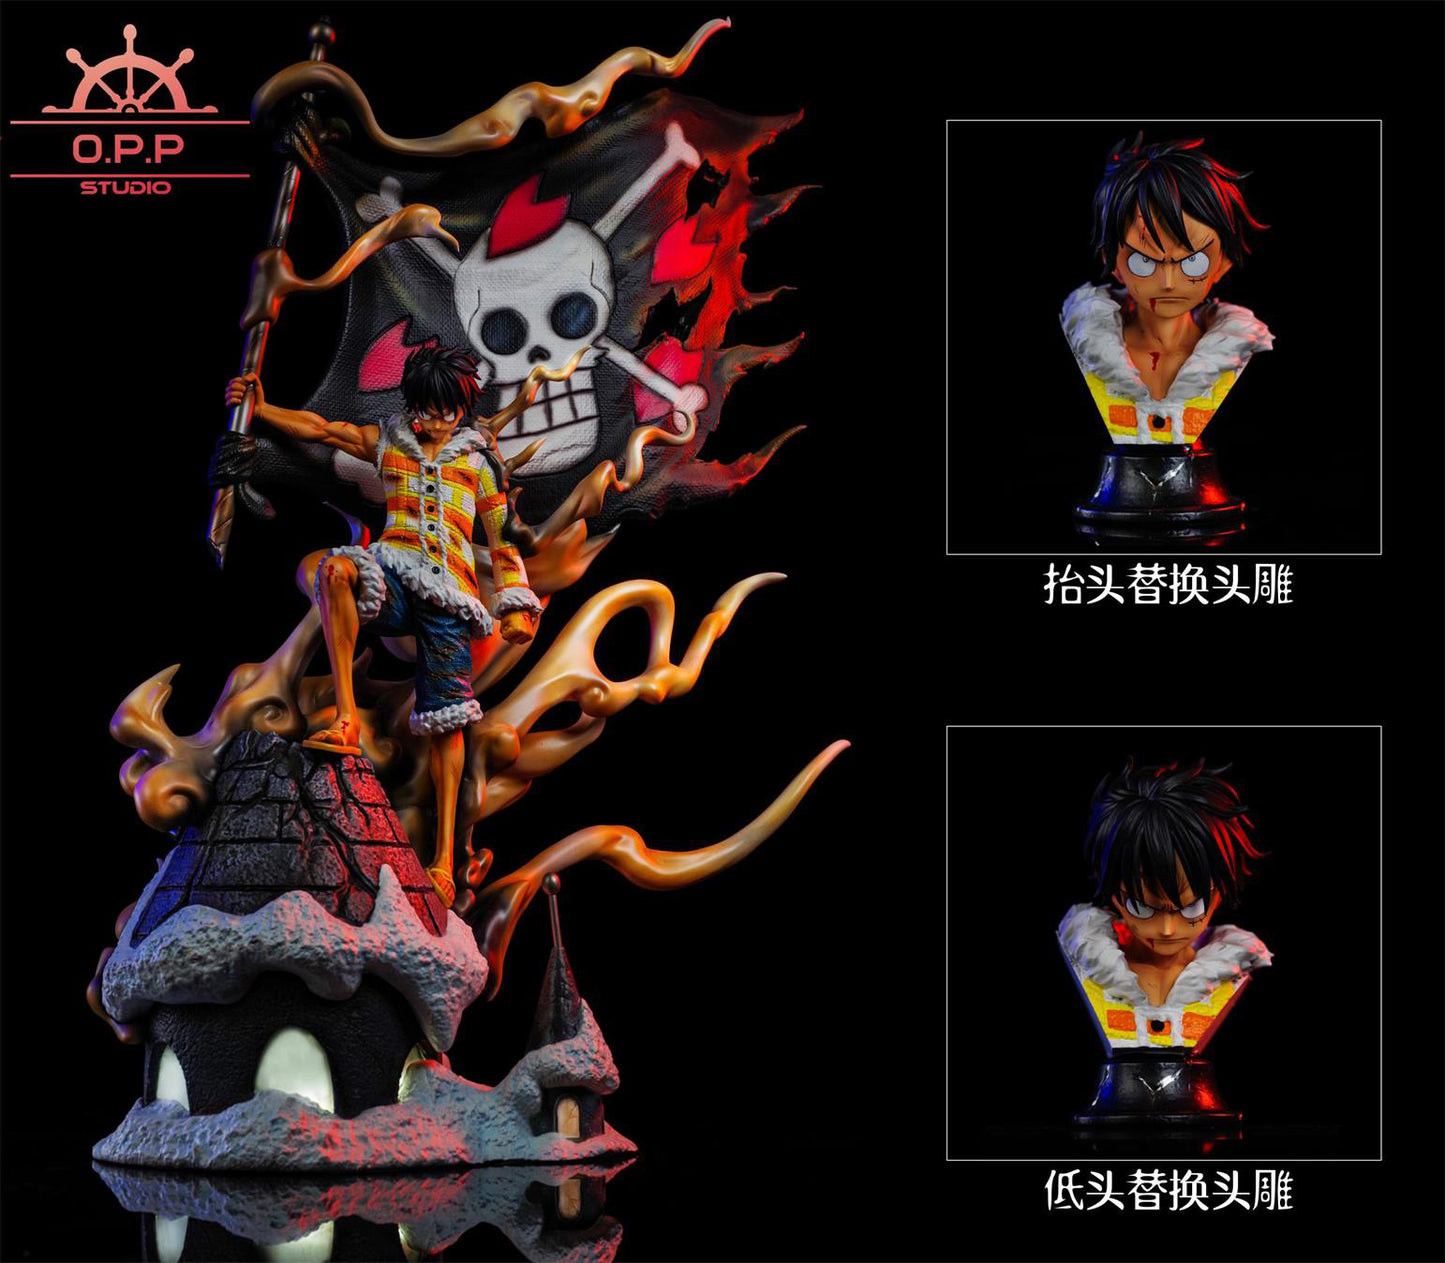 O.P.P STUDIO – ONE PIECE: DRUM ISLAND ARC LUFFY [SOLD OUT]